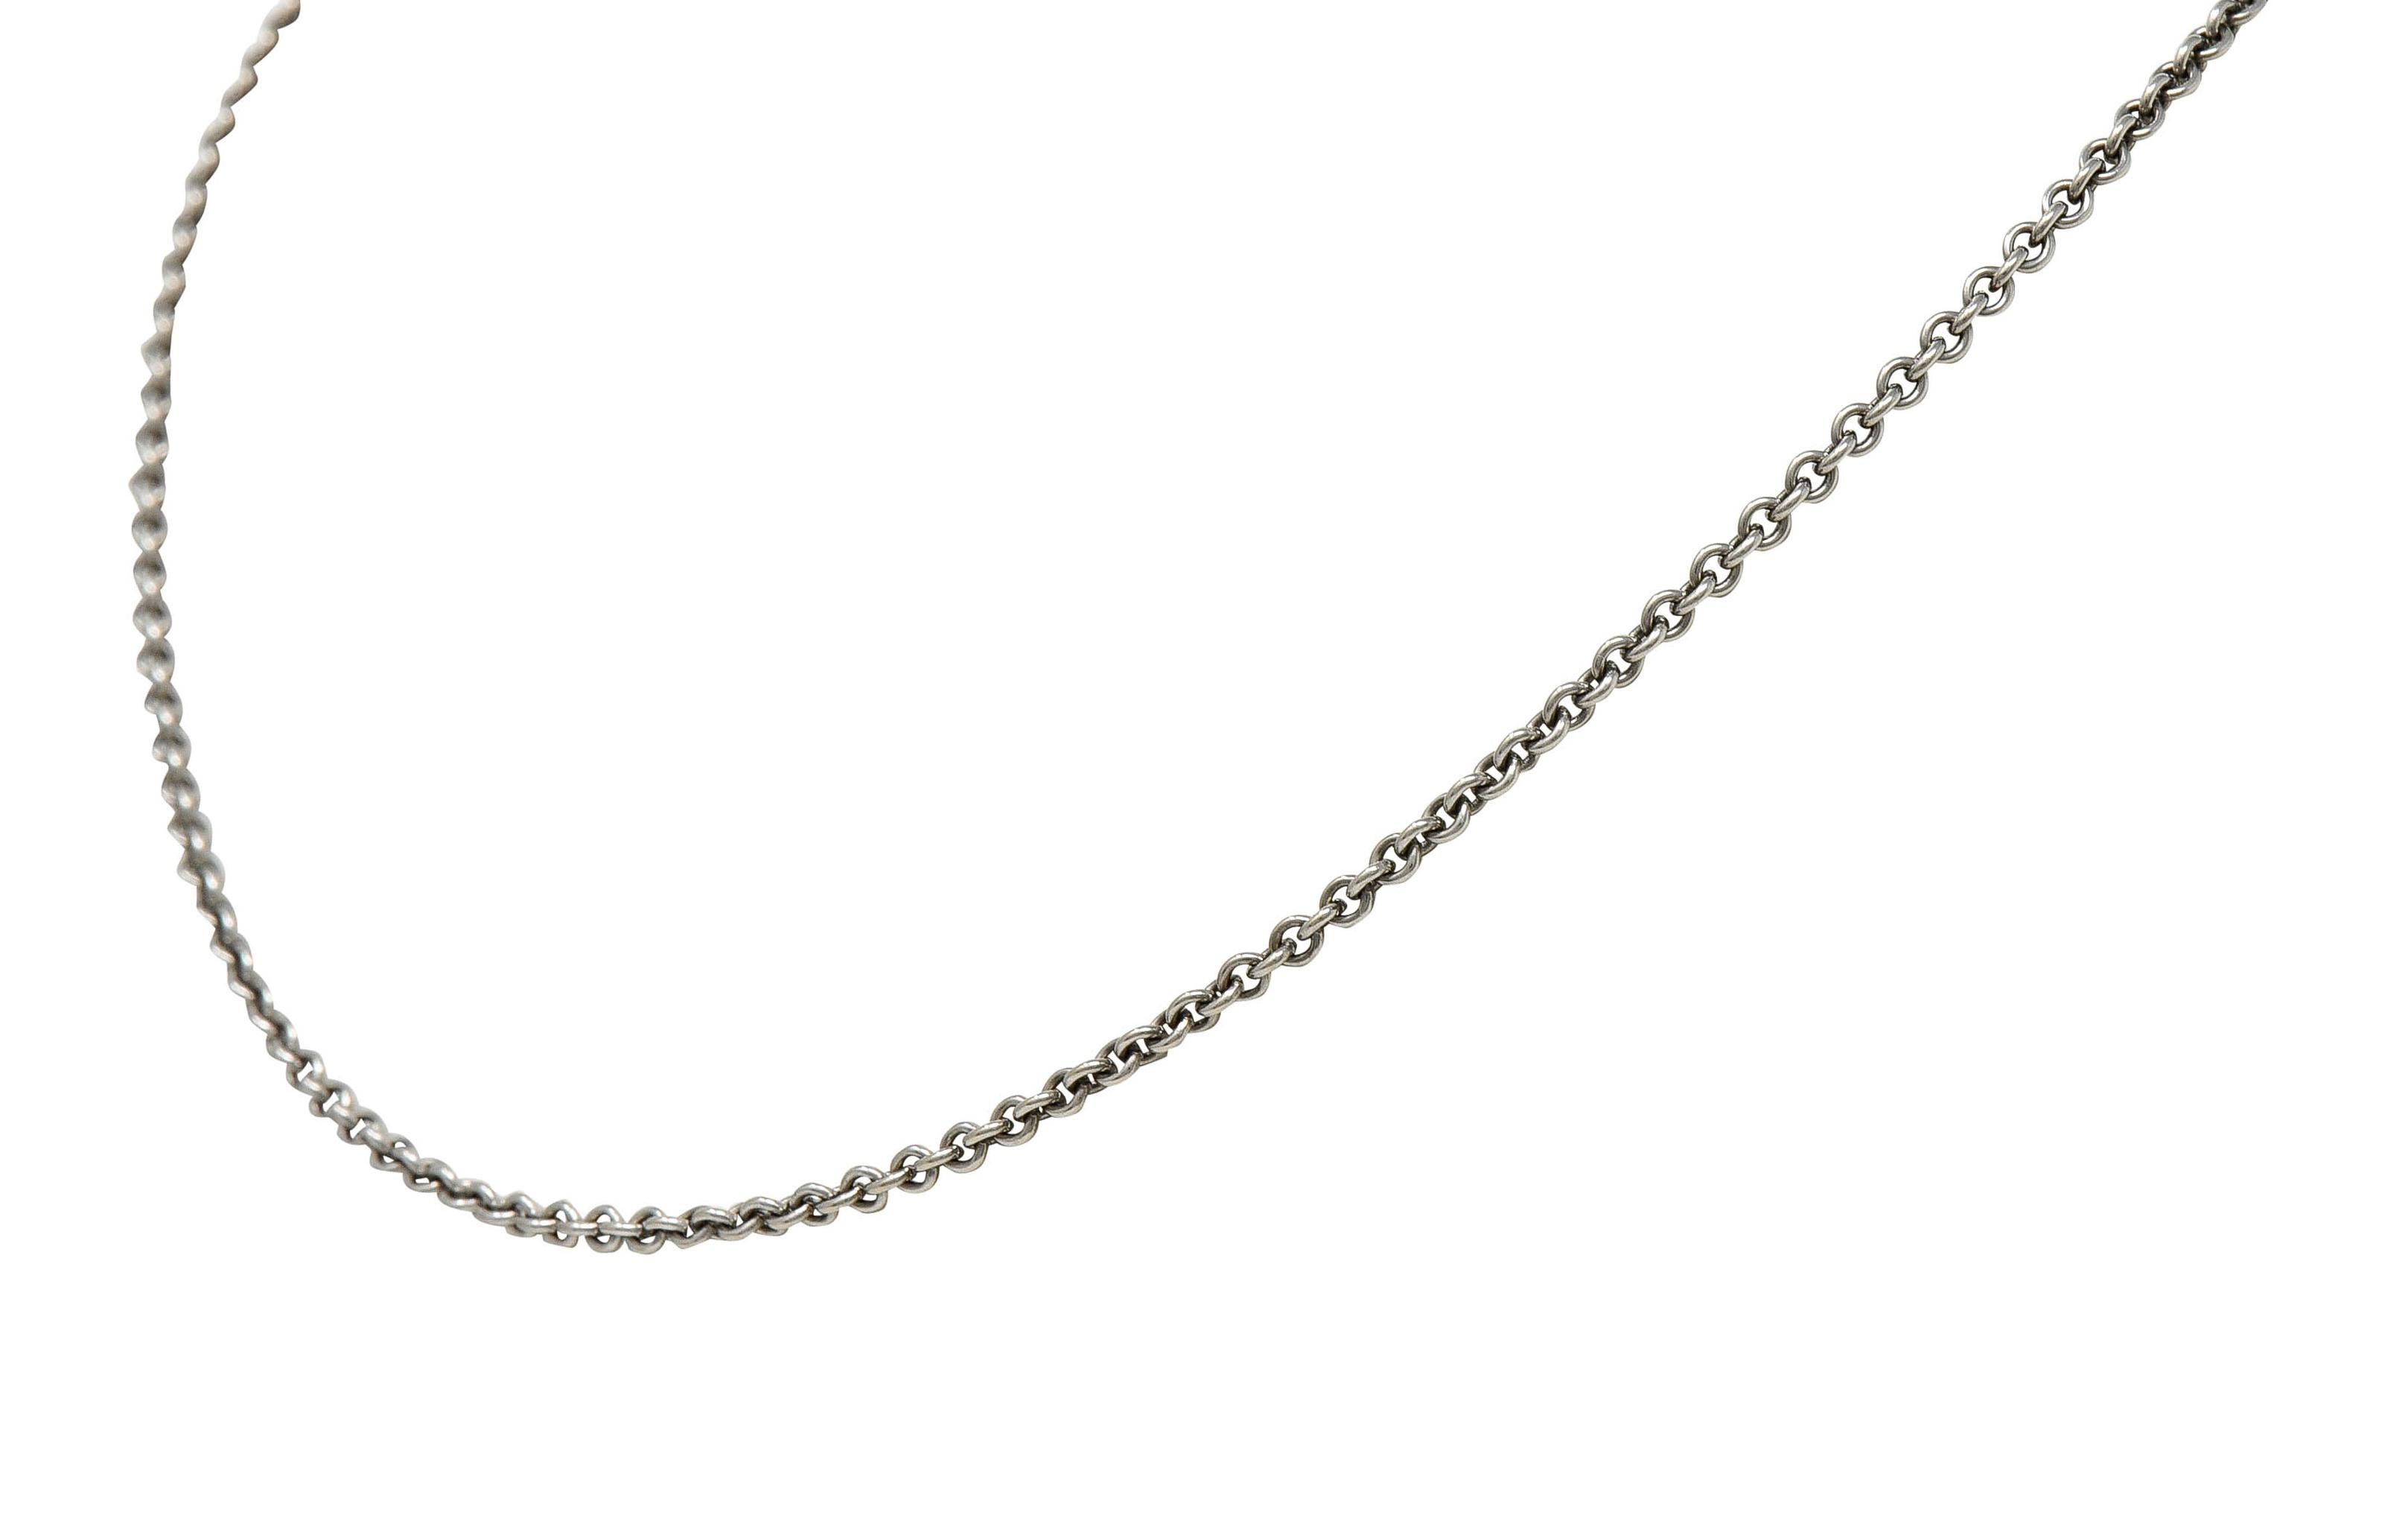 Women's or Men's Cartier French 18 Karat White Gold Classic Cable Chain Necklace